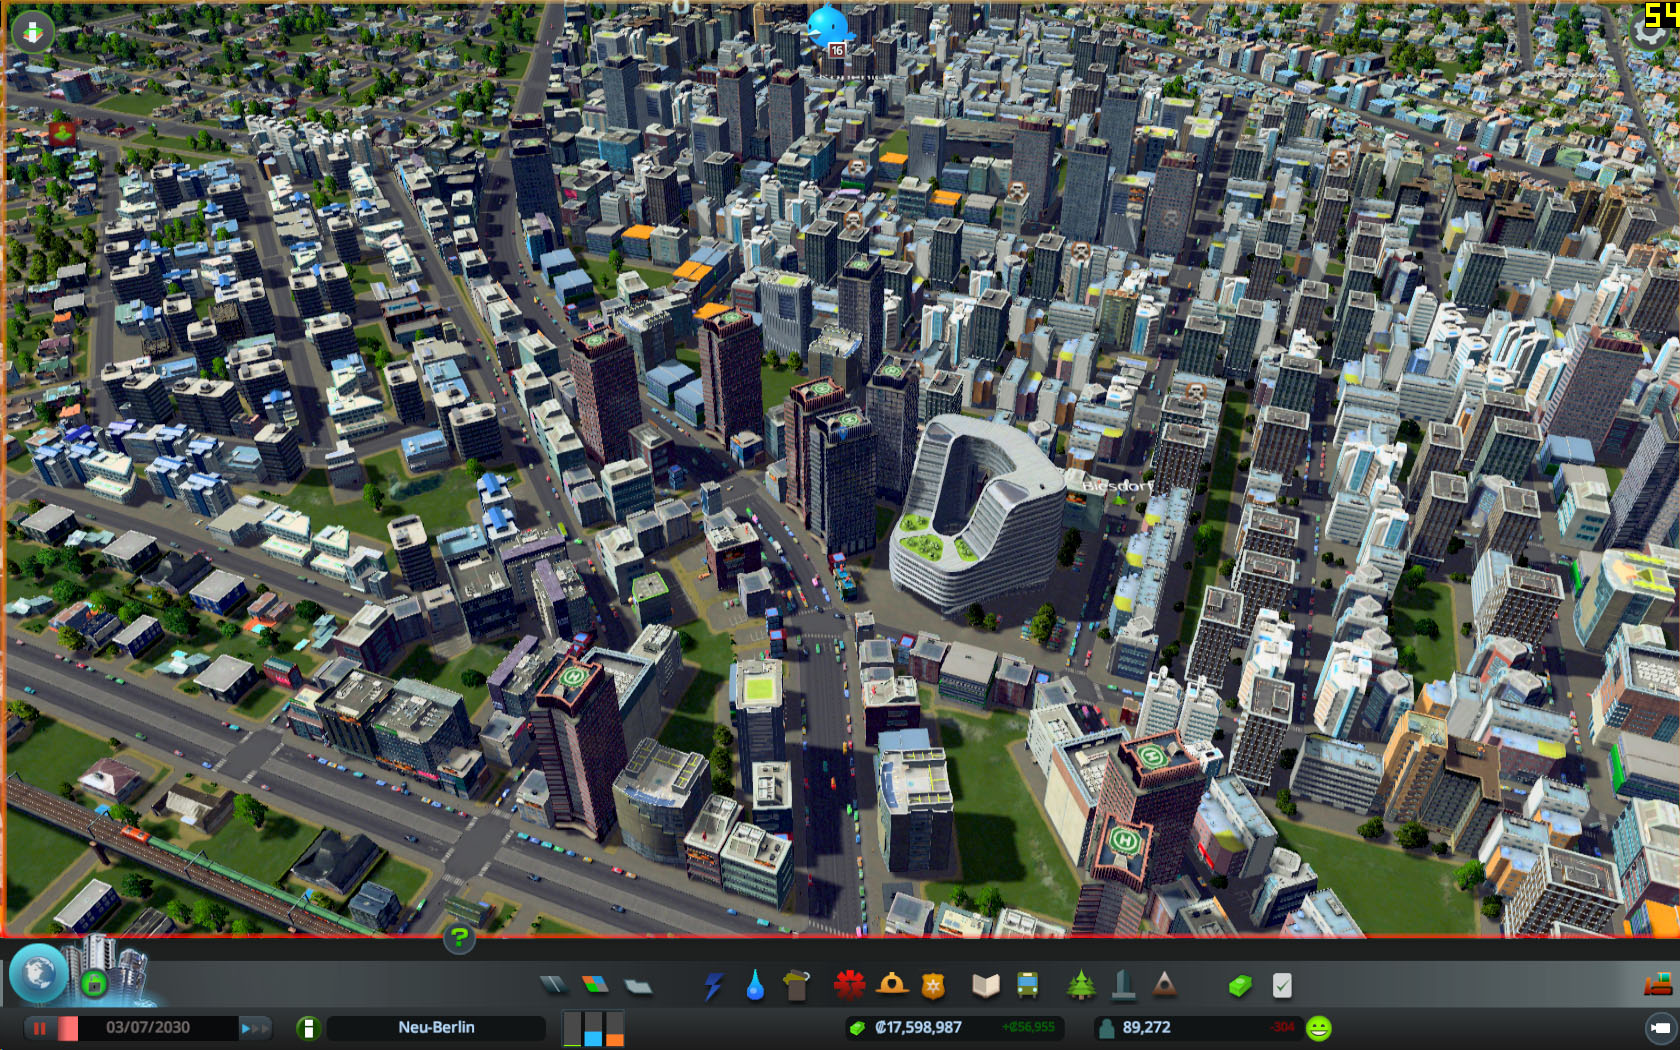 Cities: Skylines System Requirements